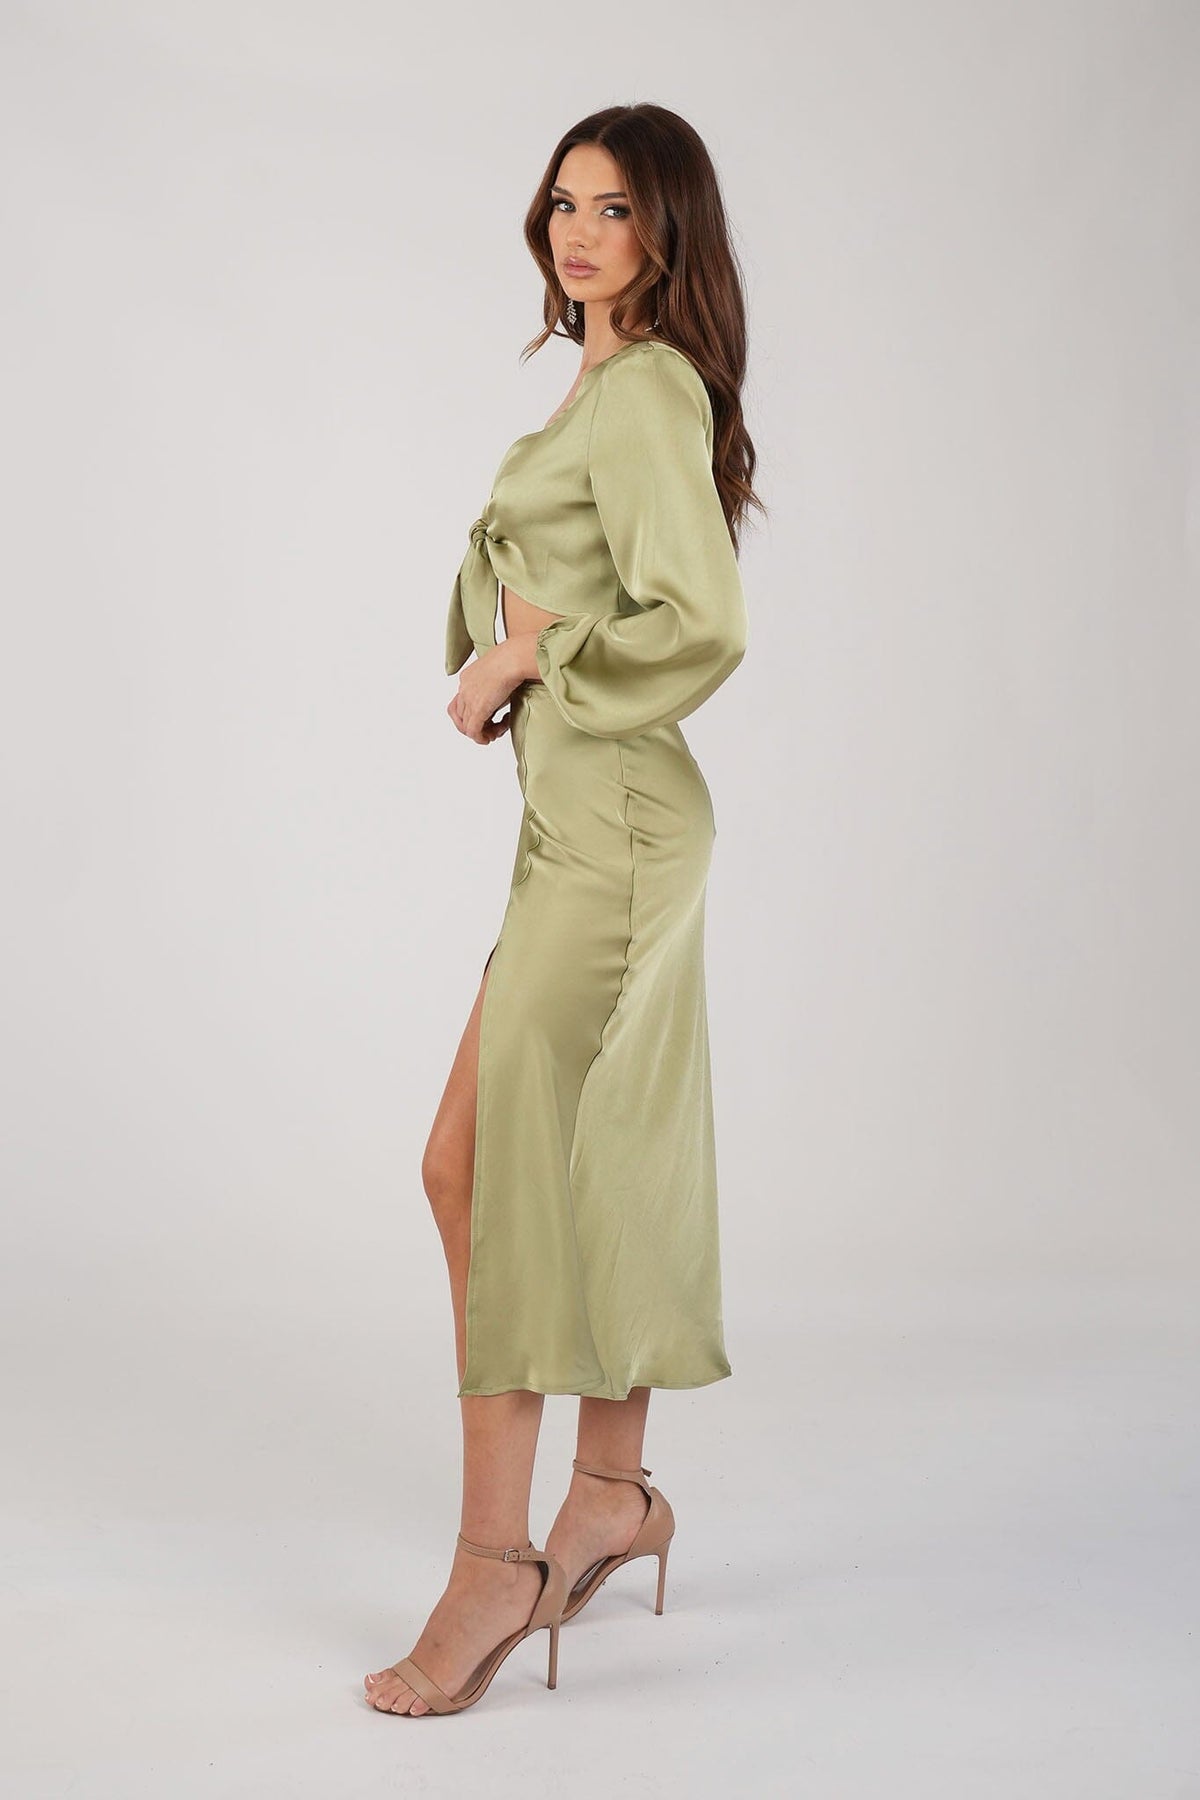 Side Image of Satin Two-Piece Set including Long Sleeve V Neck Front Tie Crop Top and Midi Skirt with Split in Olive Green